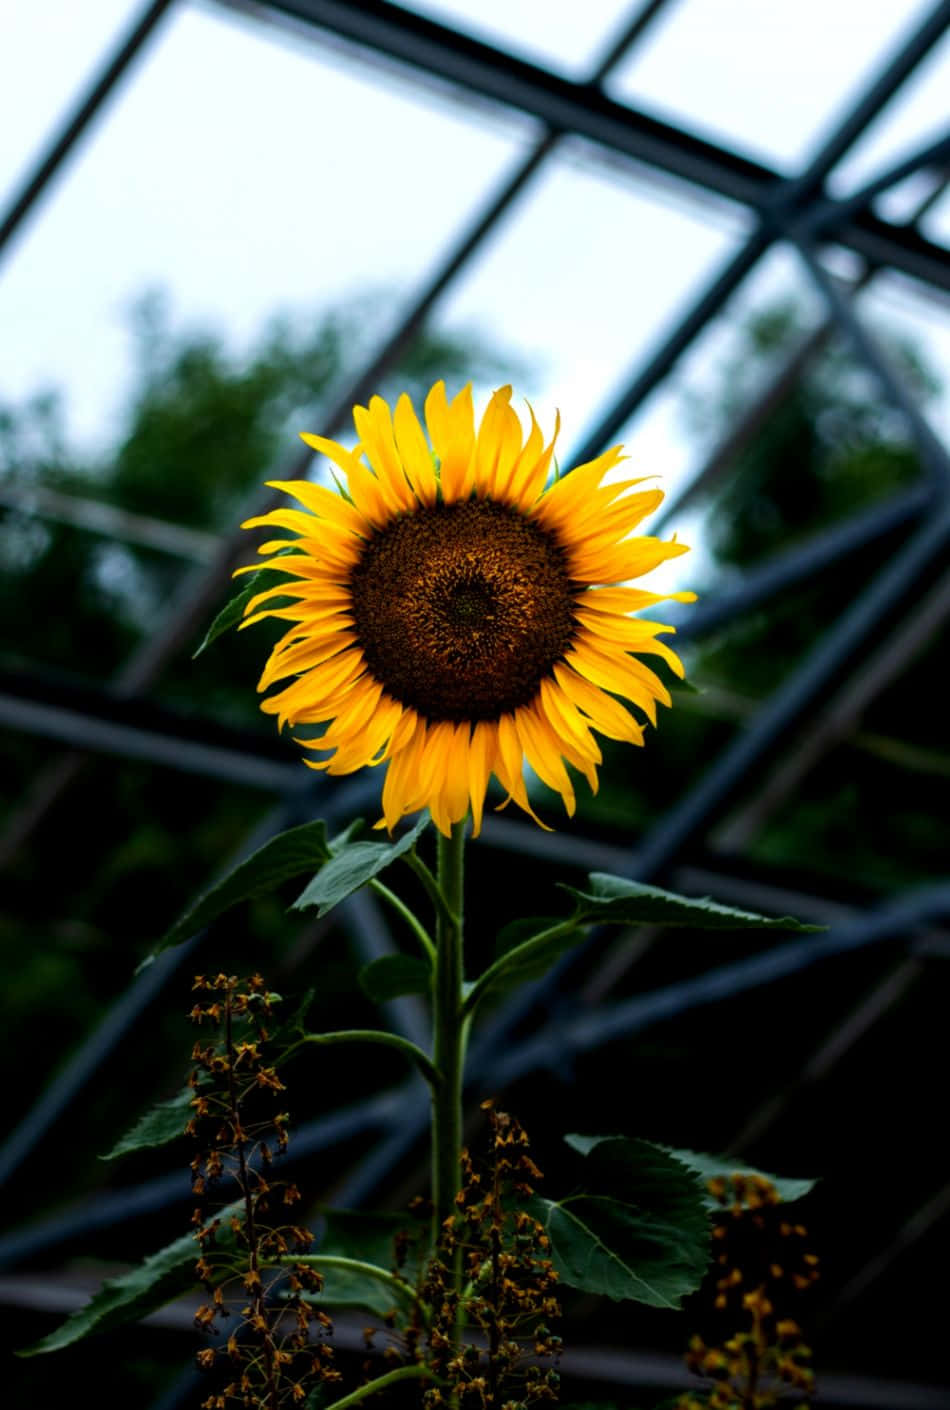 A Sunflower In A Glass Greenhouse Wallpaper